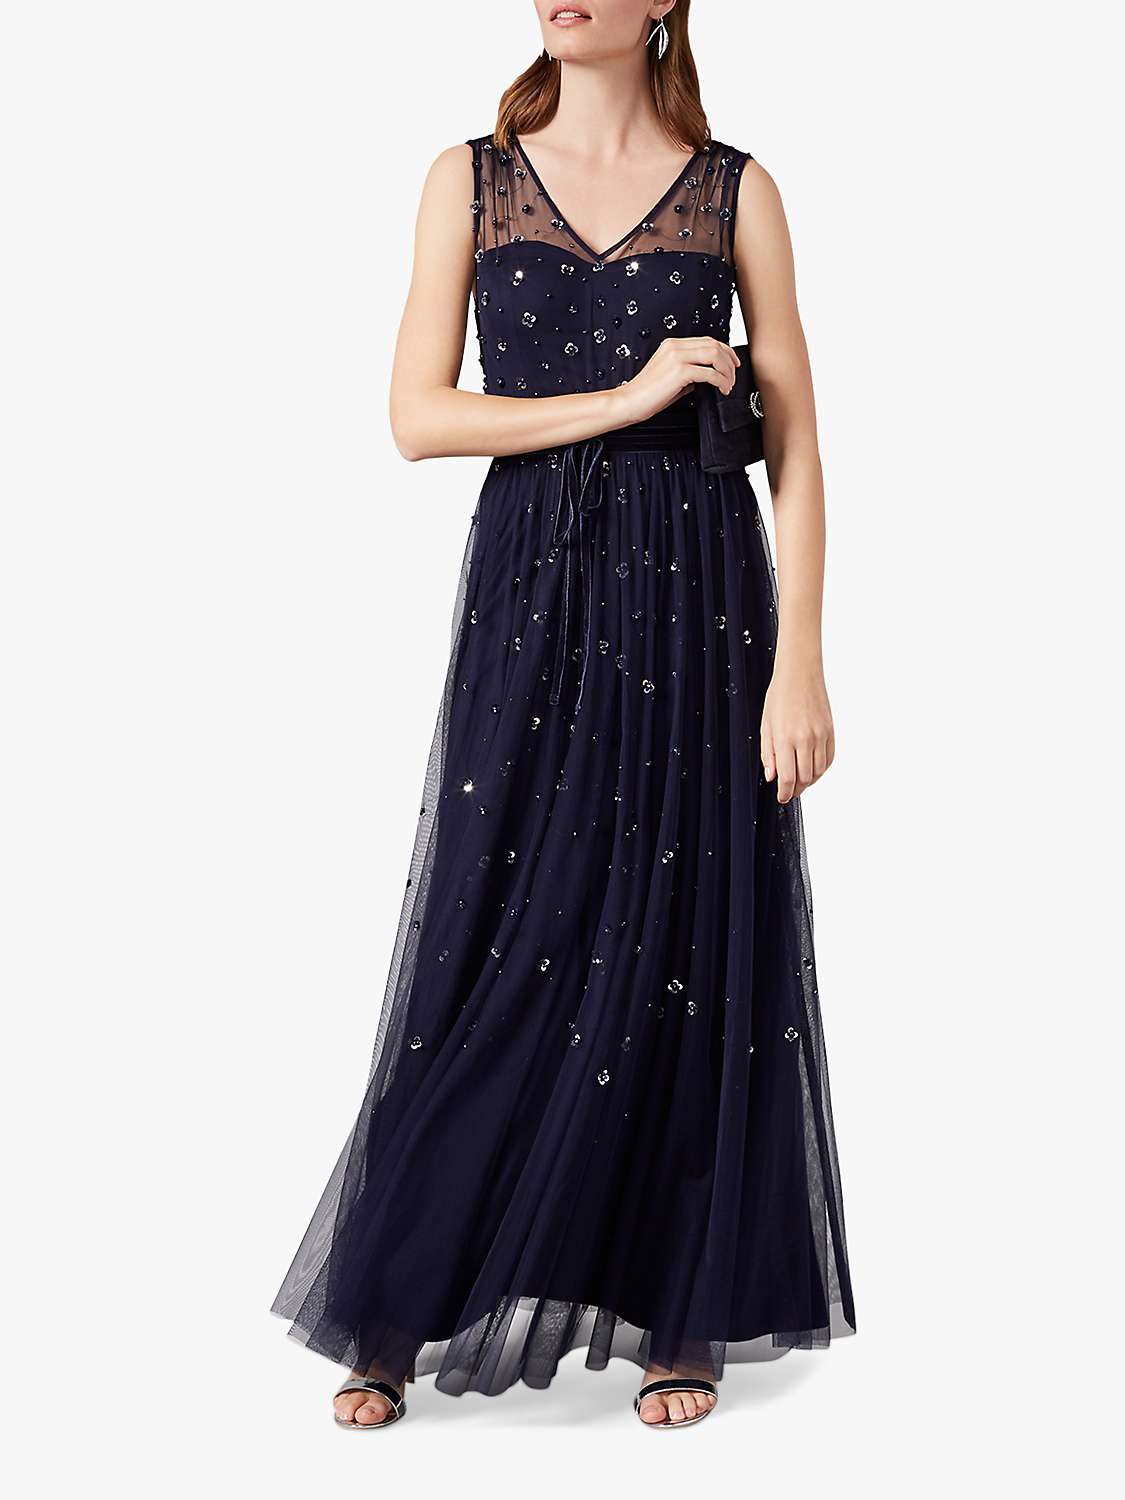 Buy Phase Eight Marcia Sequin Tulle Dress, Midnight Online at johnlewis.com